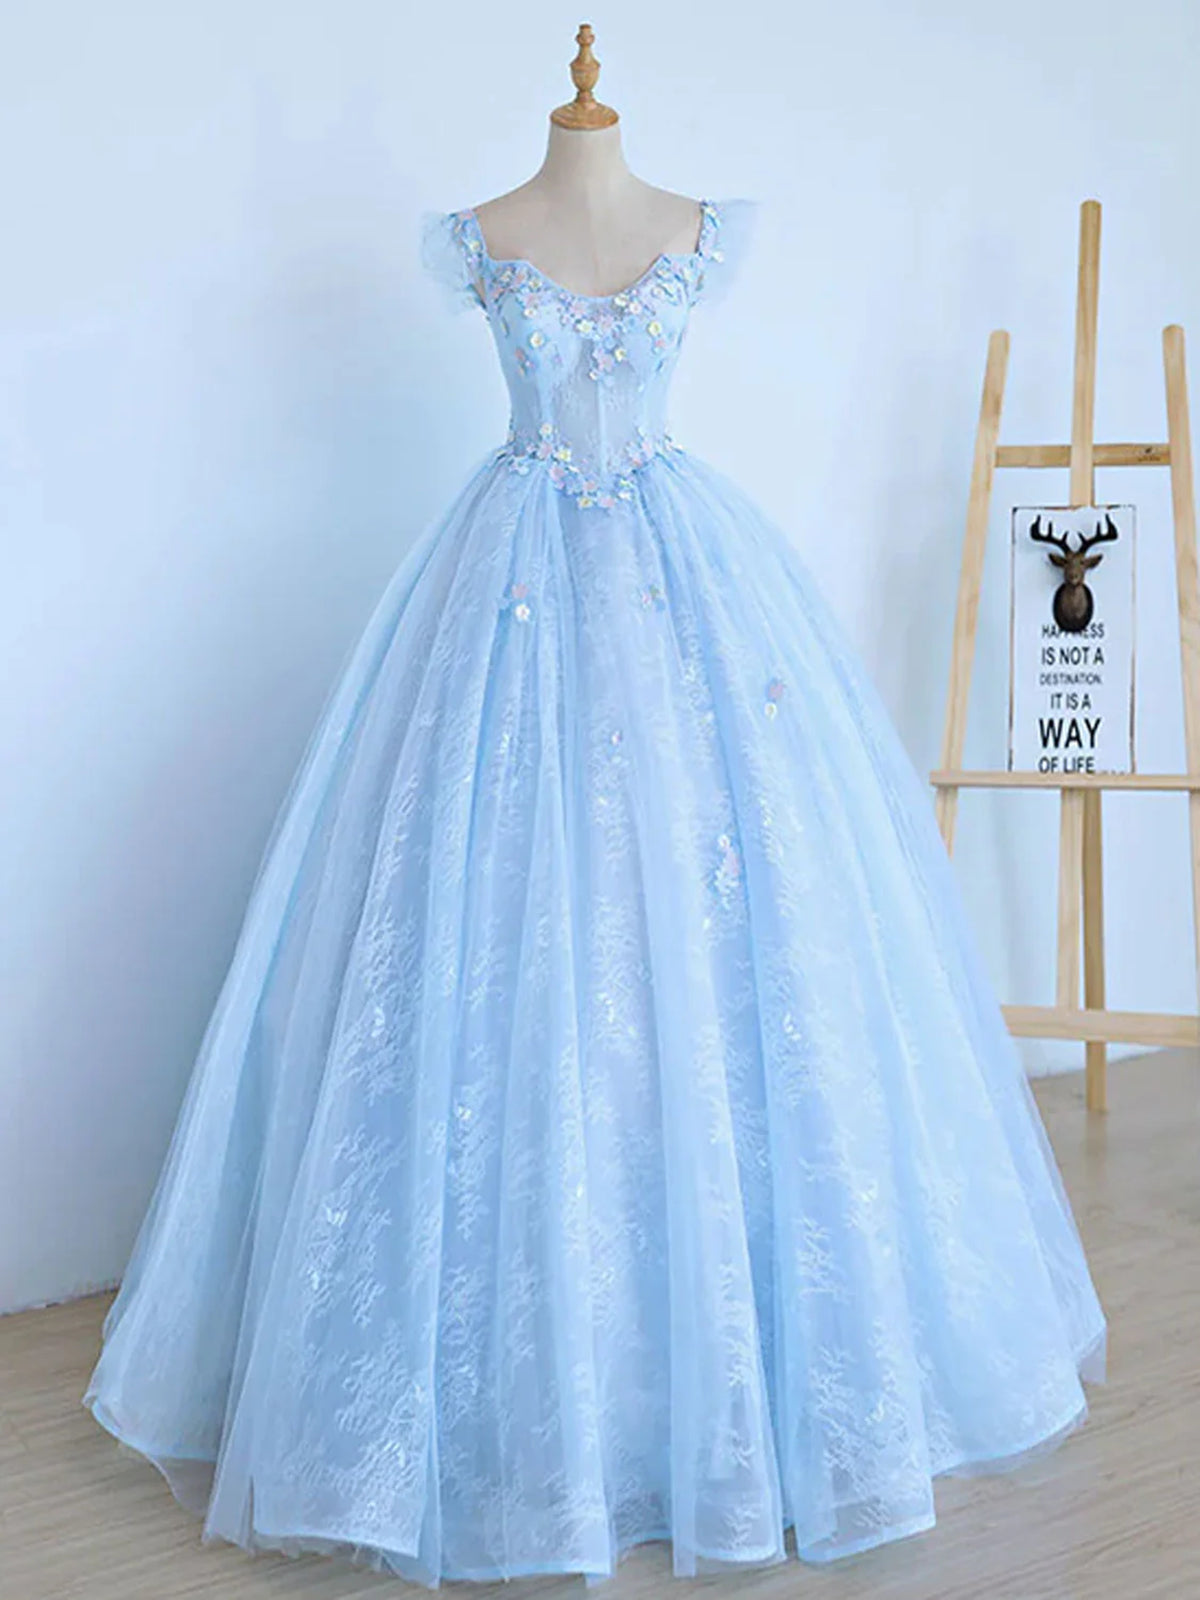 Blue Long Lace Floral Prom Dresses For Black girls For Women, Long Blue Lace Formal Evening Dresses For Black girls with Flowers